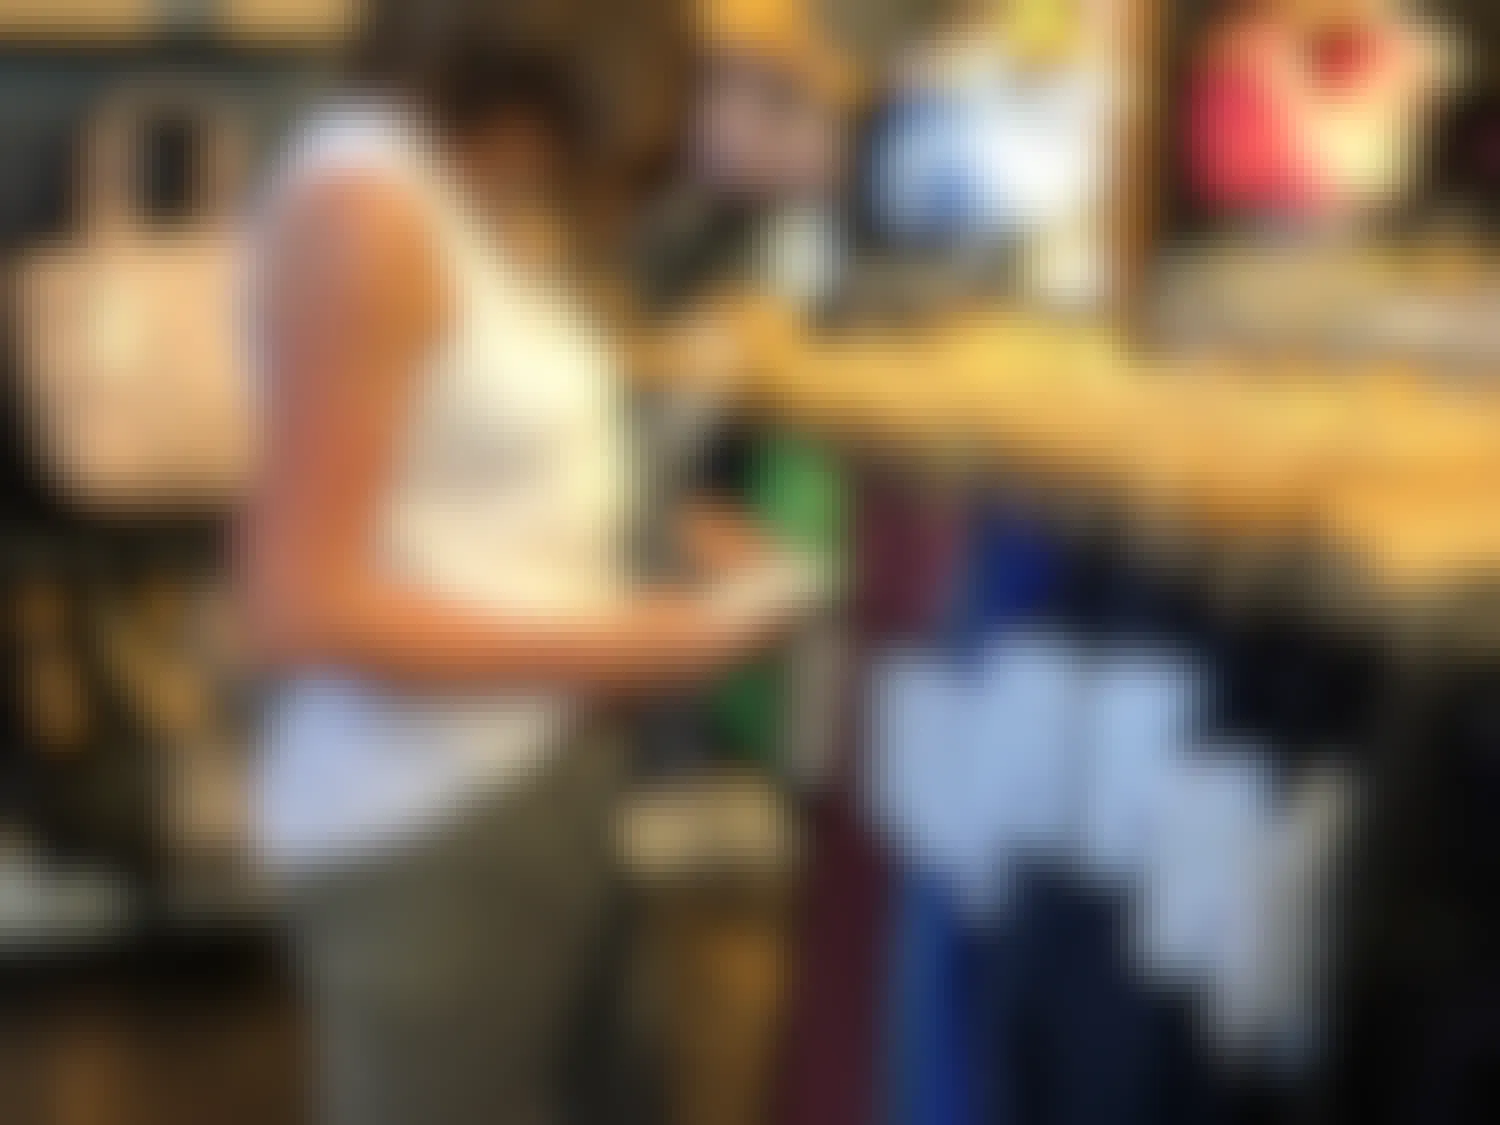 Woman looking at a leggings price tag inside the store